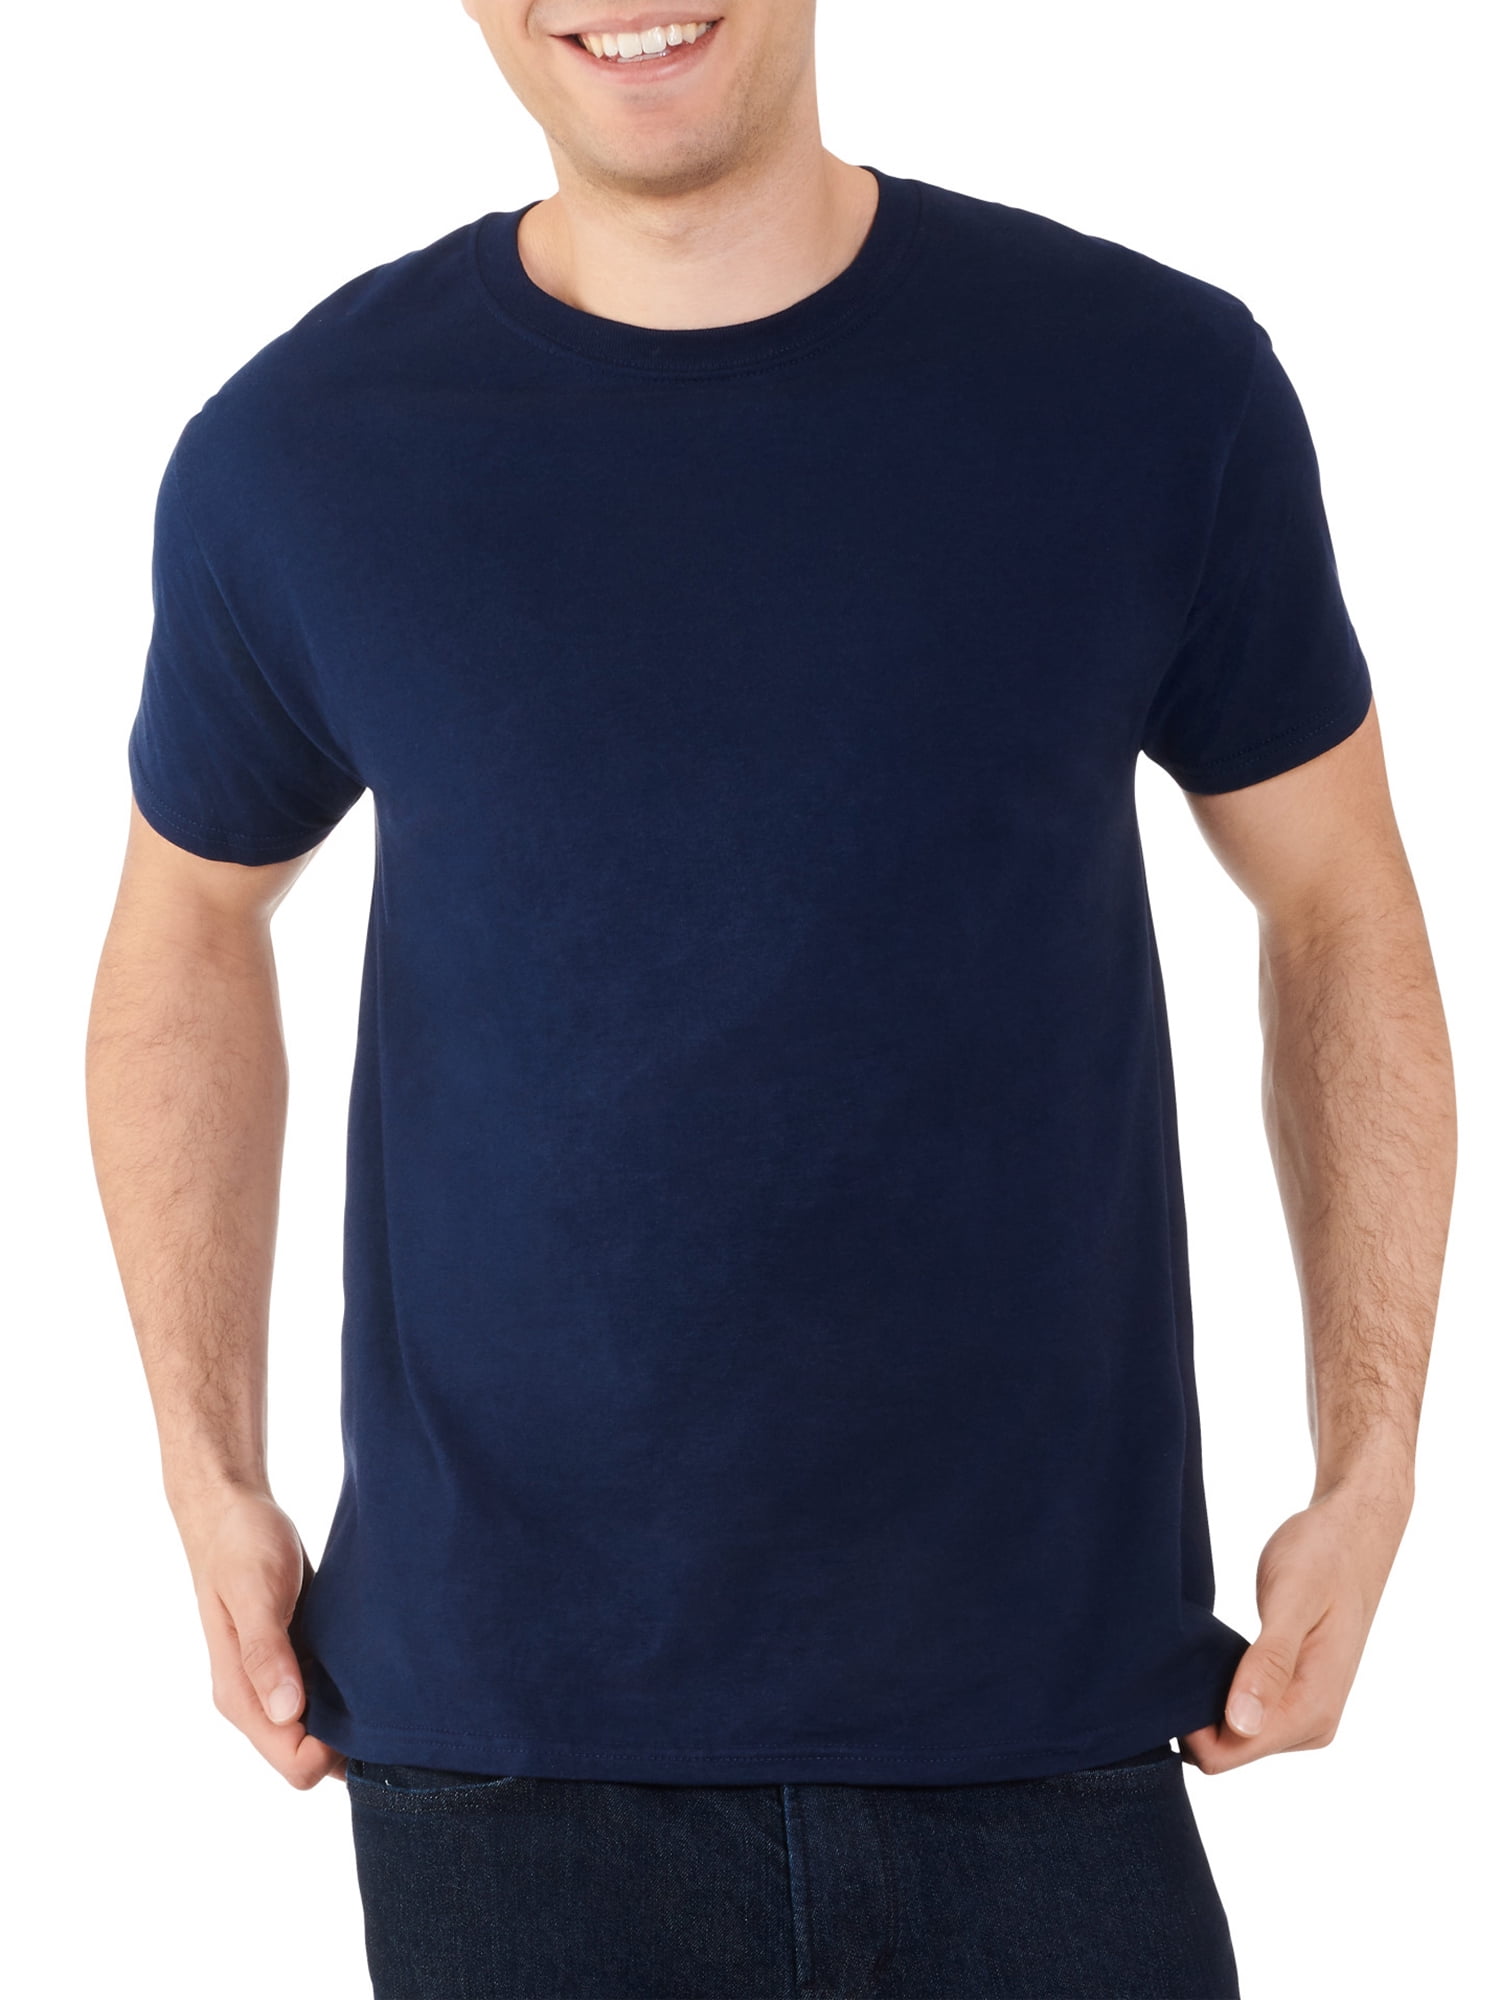 Fruit of the Loom Men's and Big Men's 360 Breathe Crew T Shirt, Up to ...